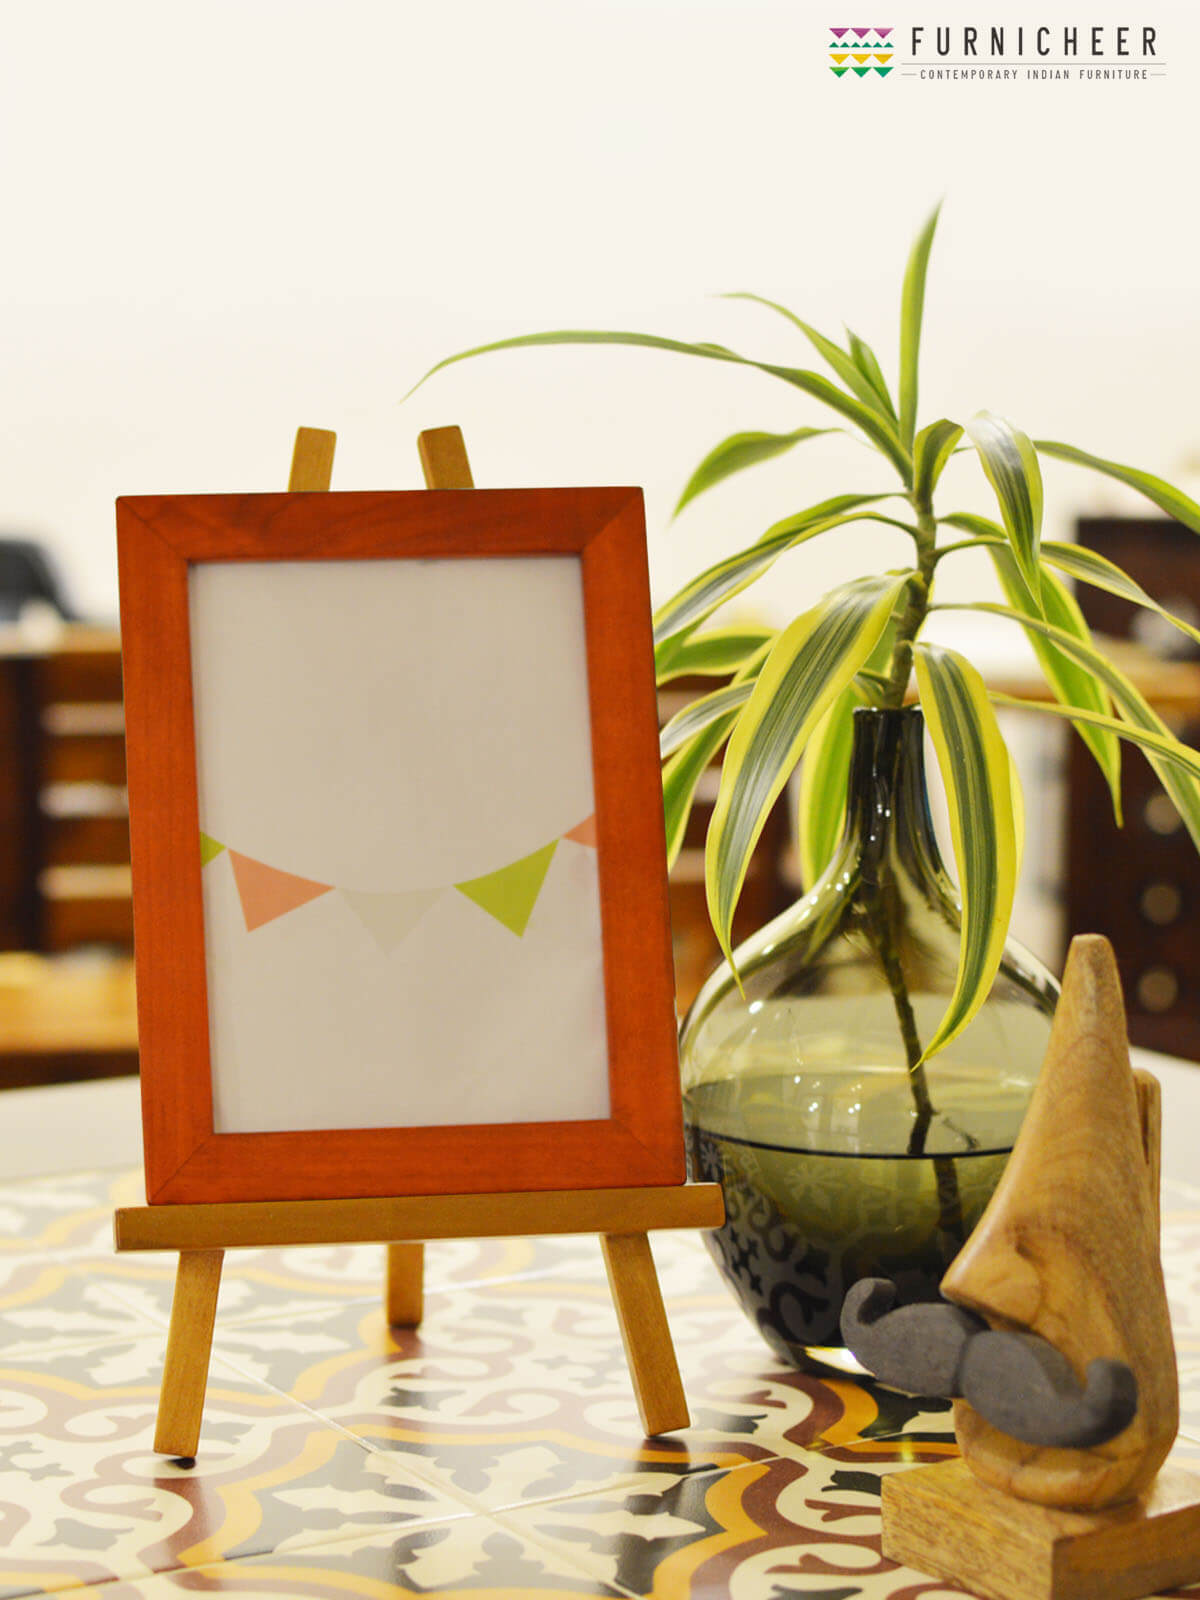 1.PICTURE FRAME WITH EASEL STAND (1)